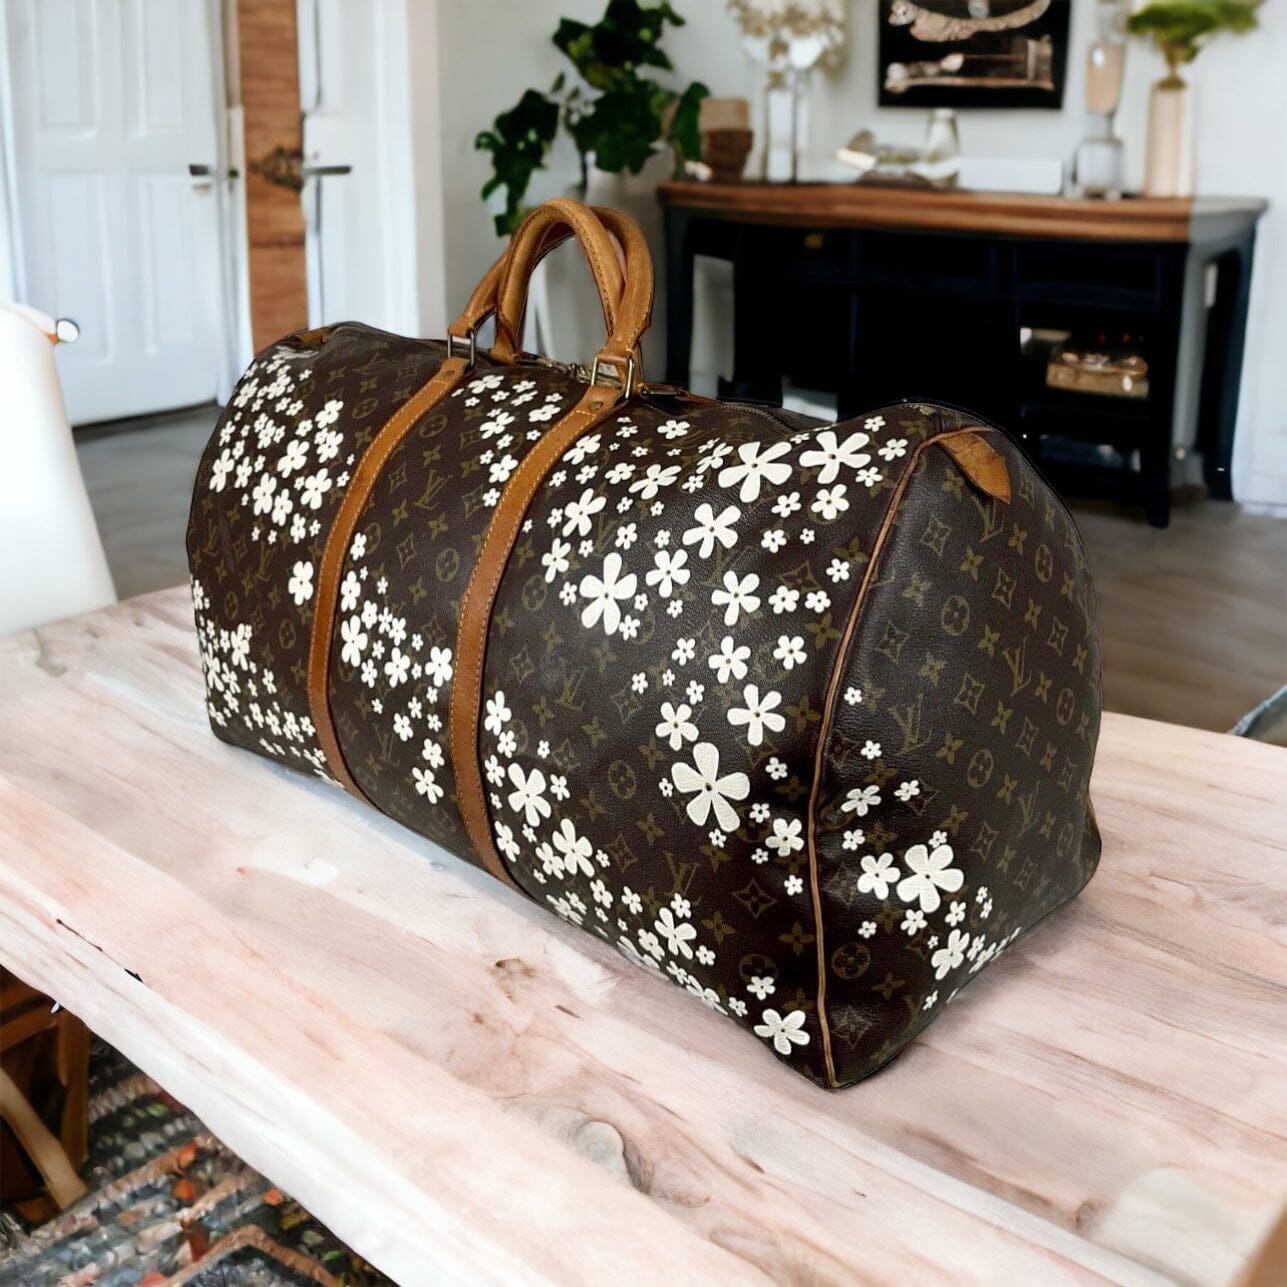 Handpainted 'The Kid' on LV Travel Luggage. Personalized for Mrs